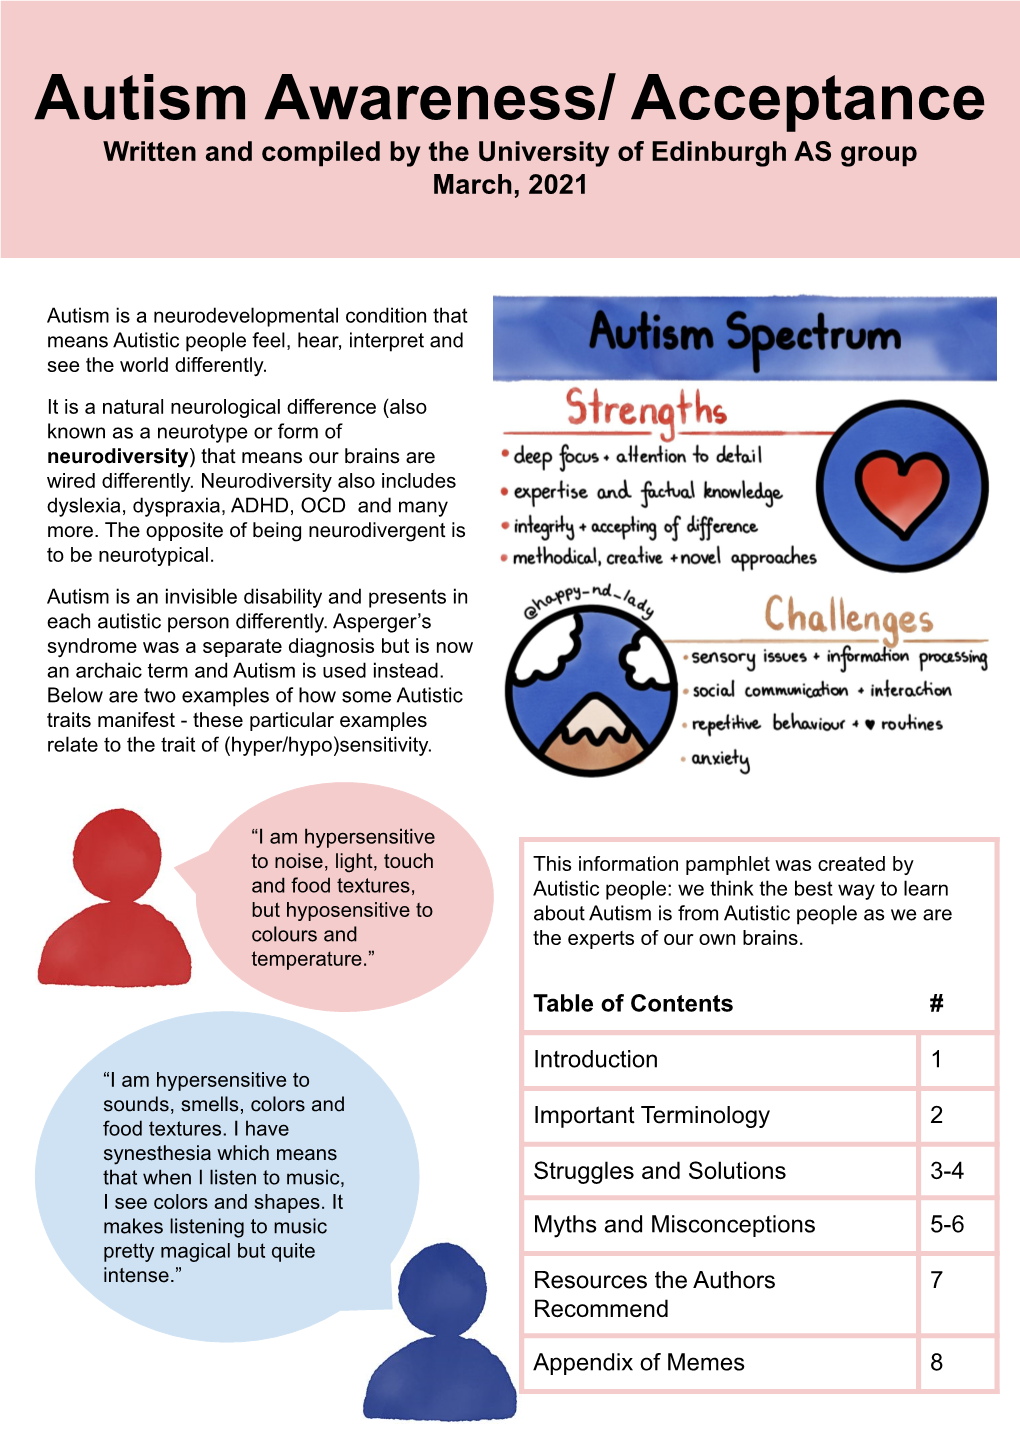 Autism Awareness/ Acceptance Written and Compiled by the University of Edinburgh AS Group March, 2021